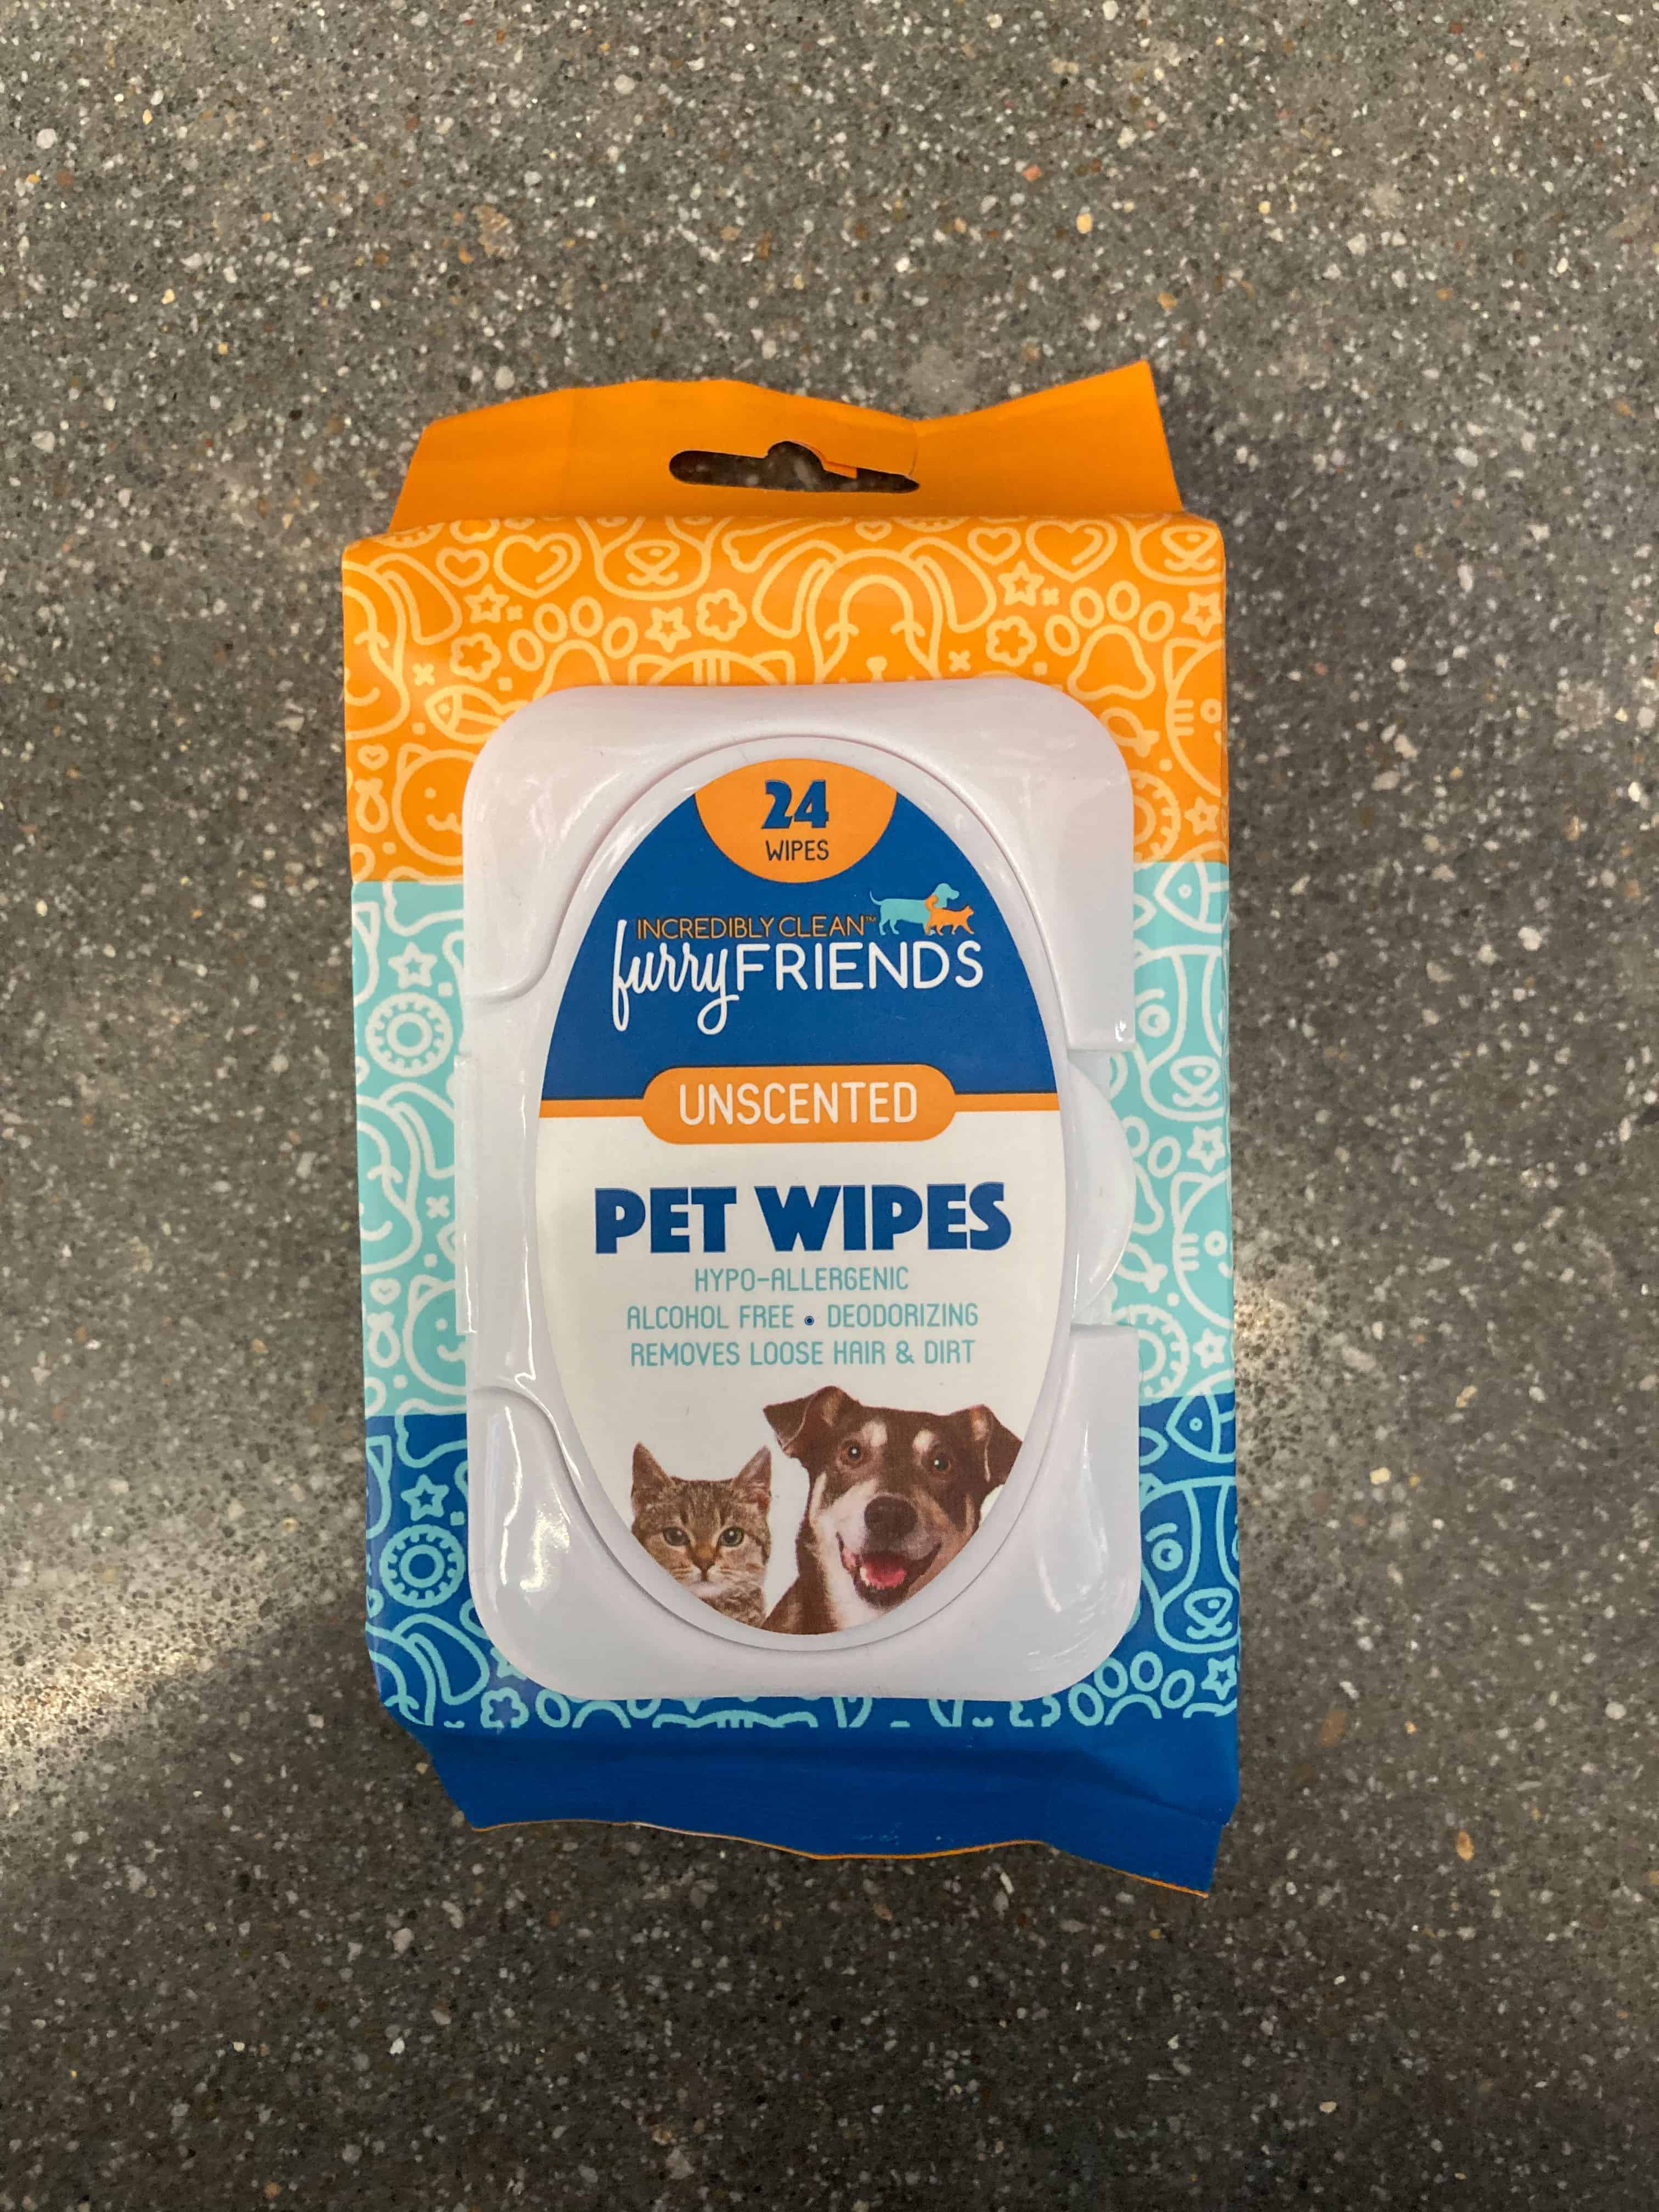 Image featuring FurryFriends pet wipes.